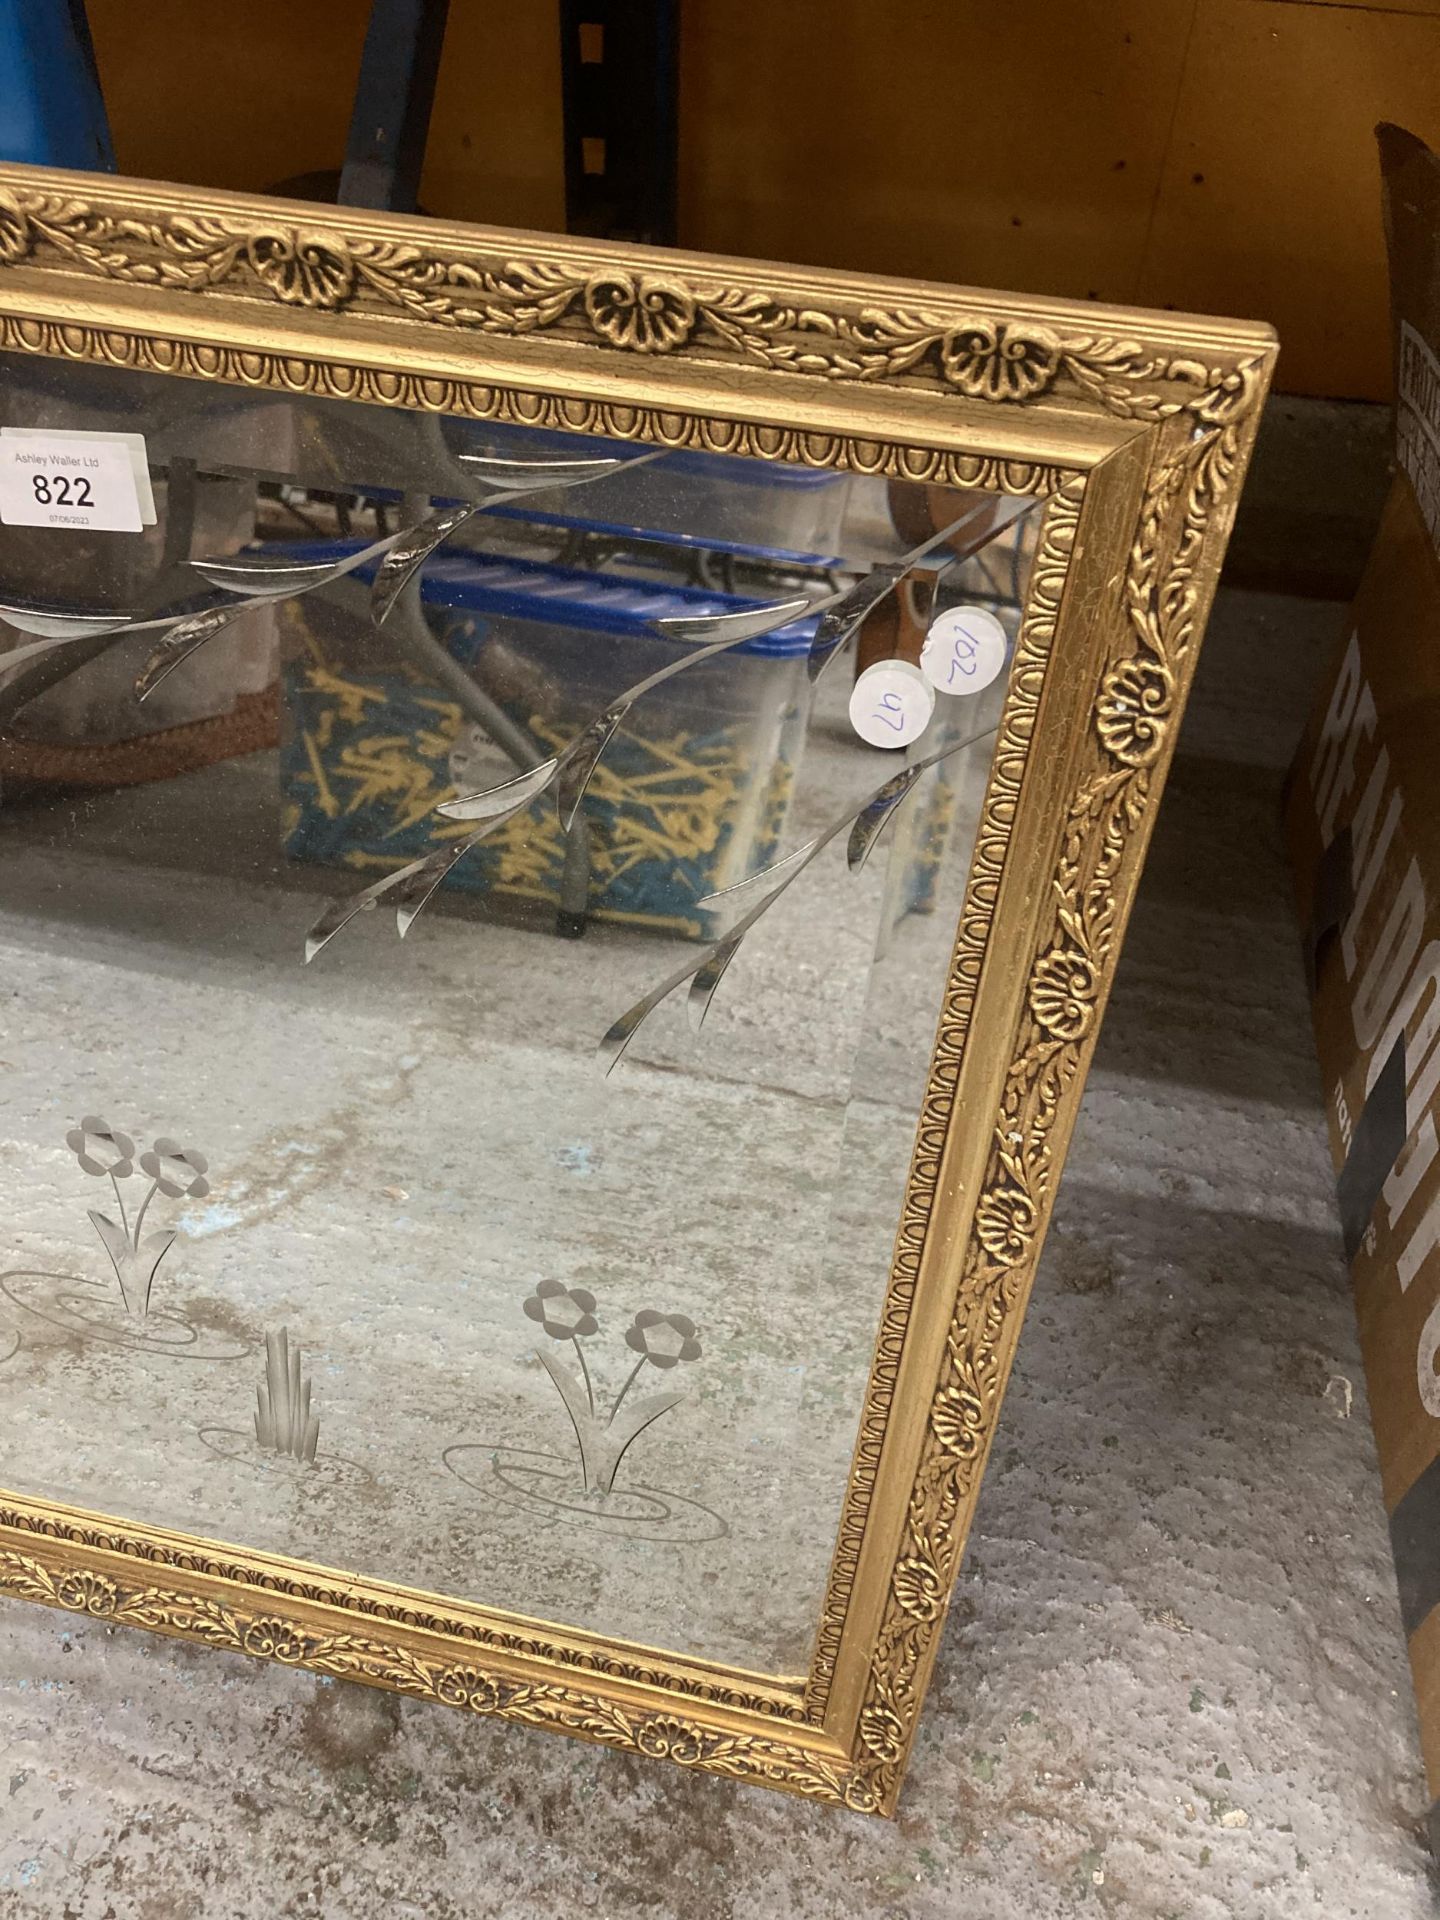 AN ORNATE GILT FRAMED MIRROR WITH SWAN DESIGN - Image 3 of 3